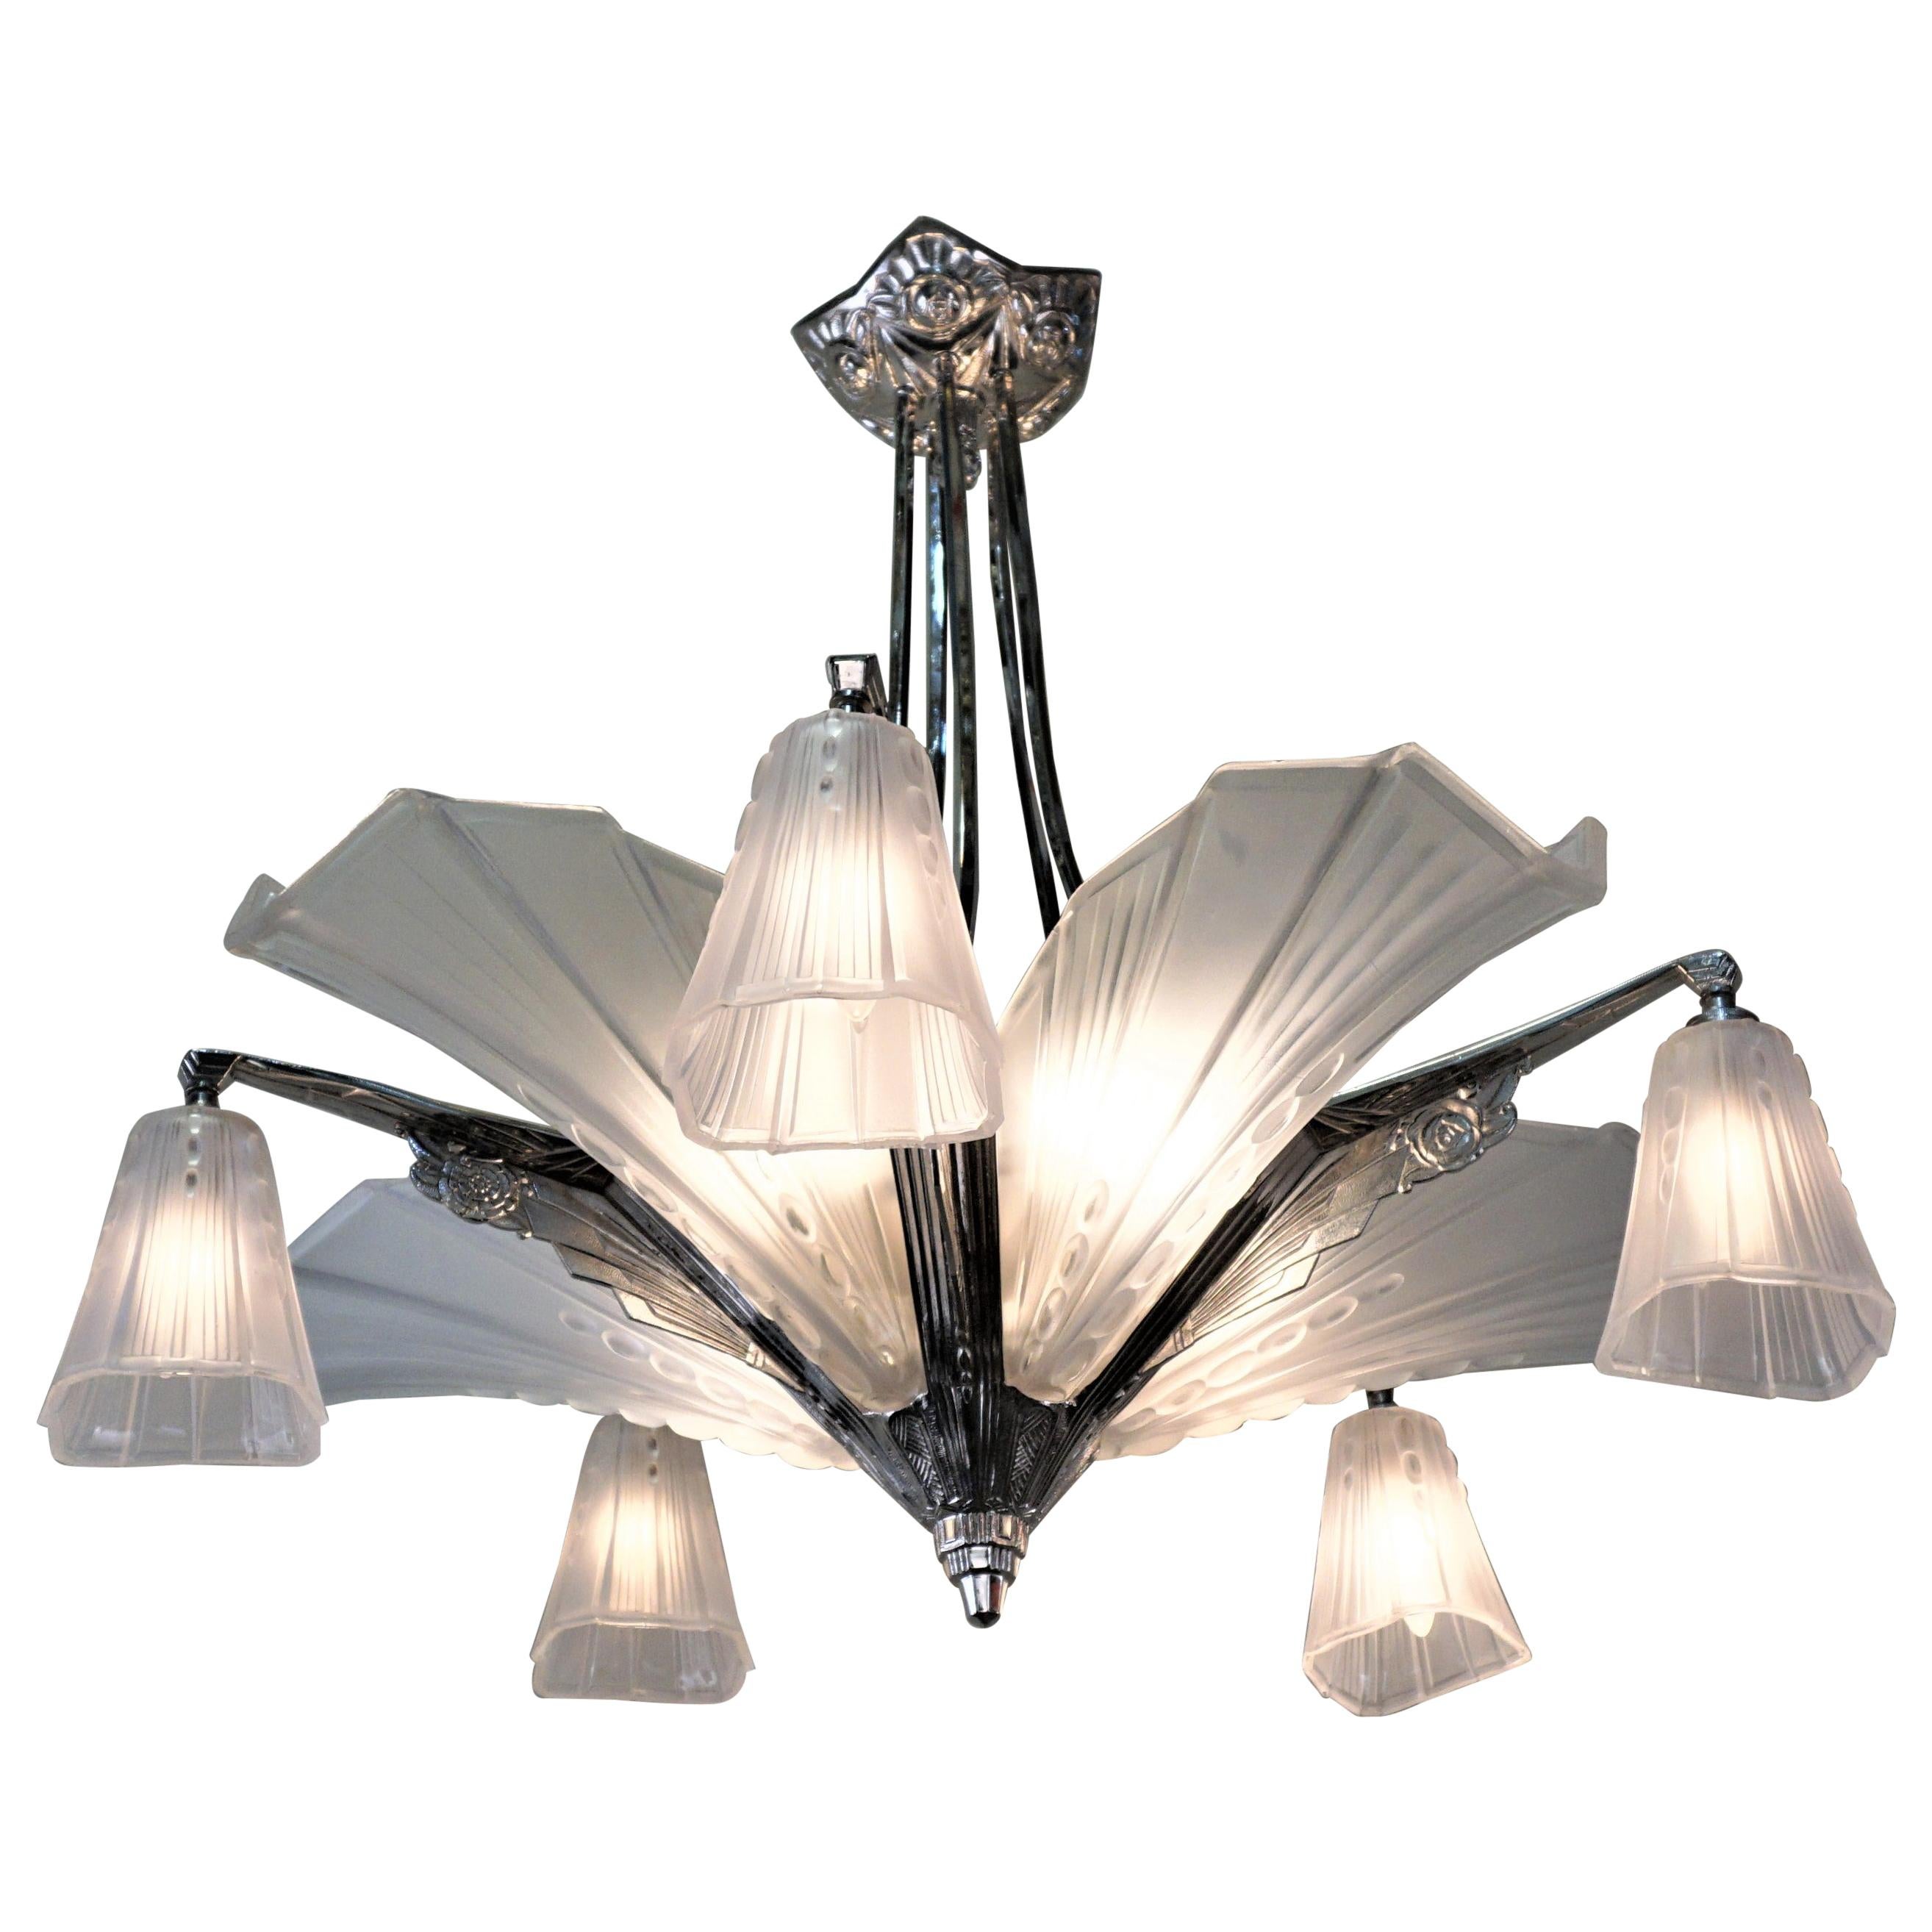 Pair of French Art Deco Chandeliers by Atelier E.J.G